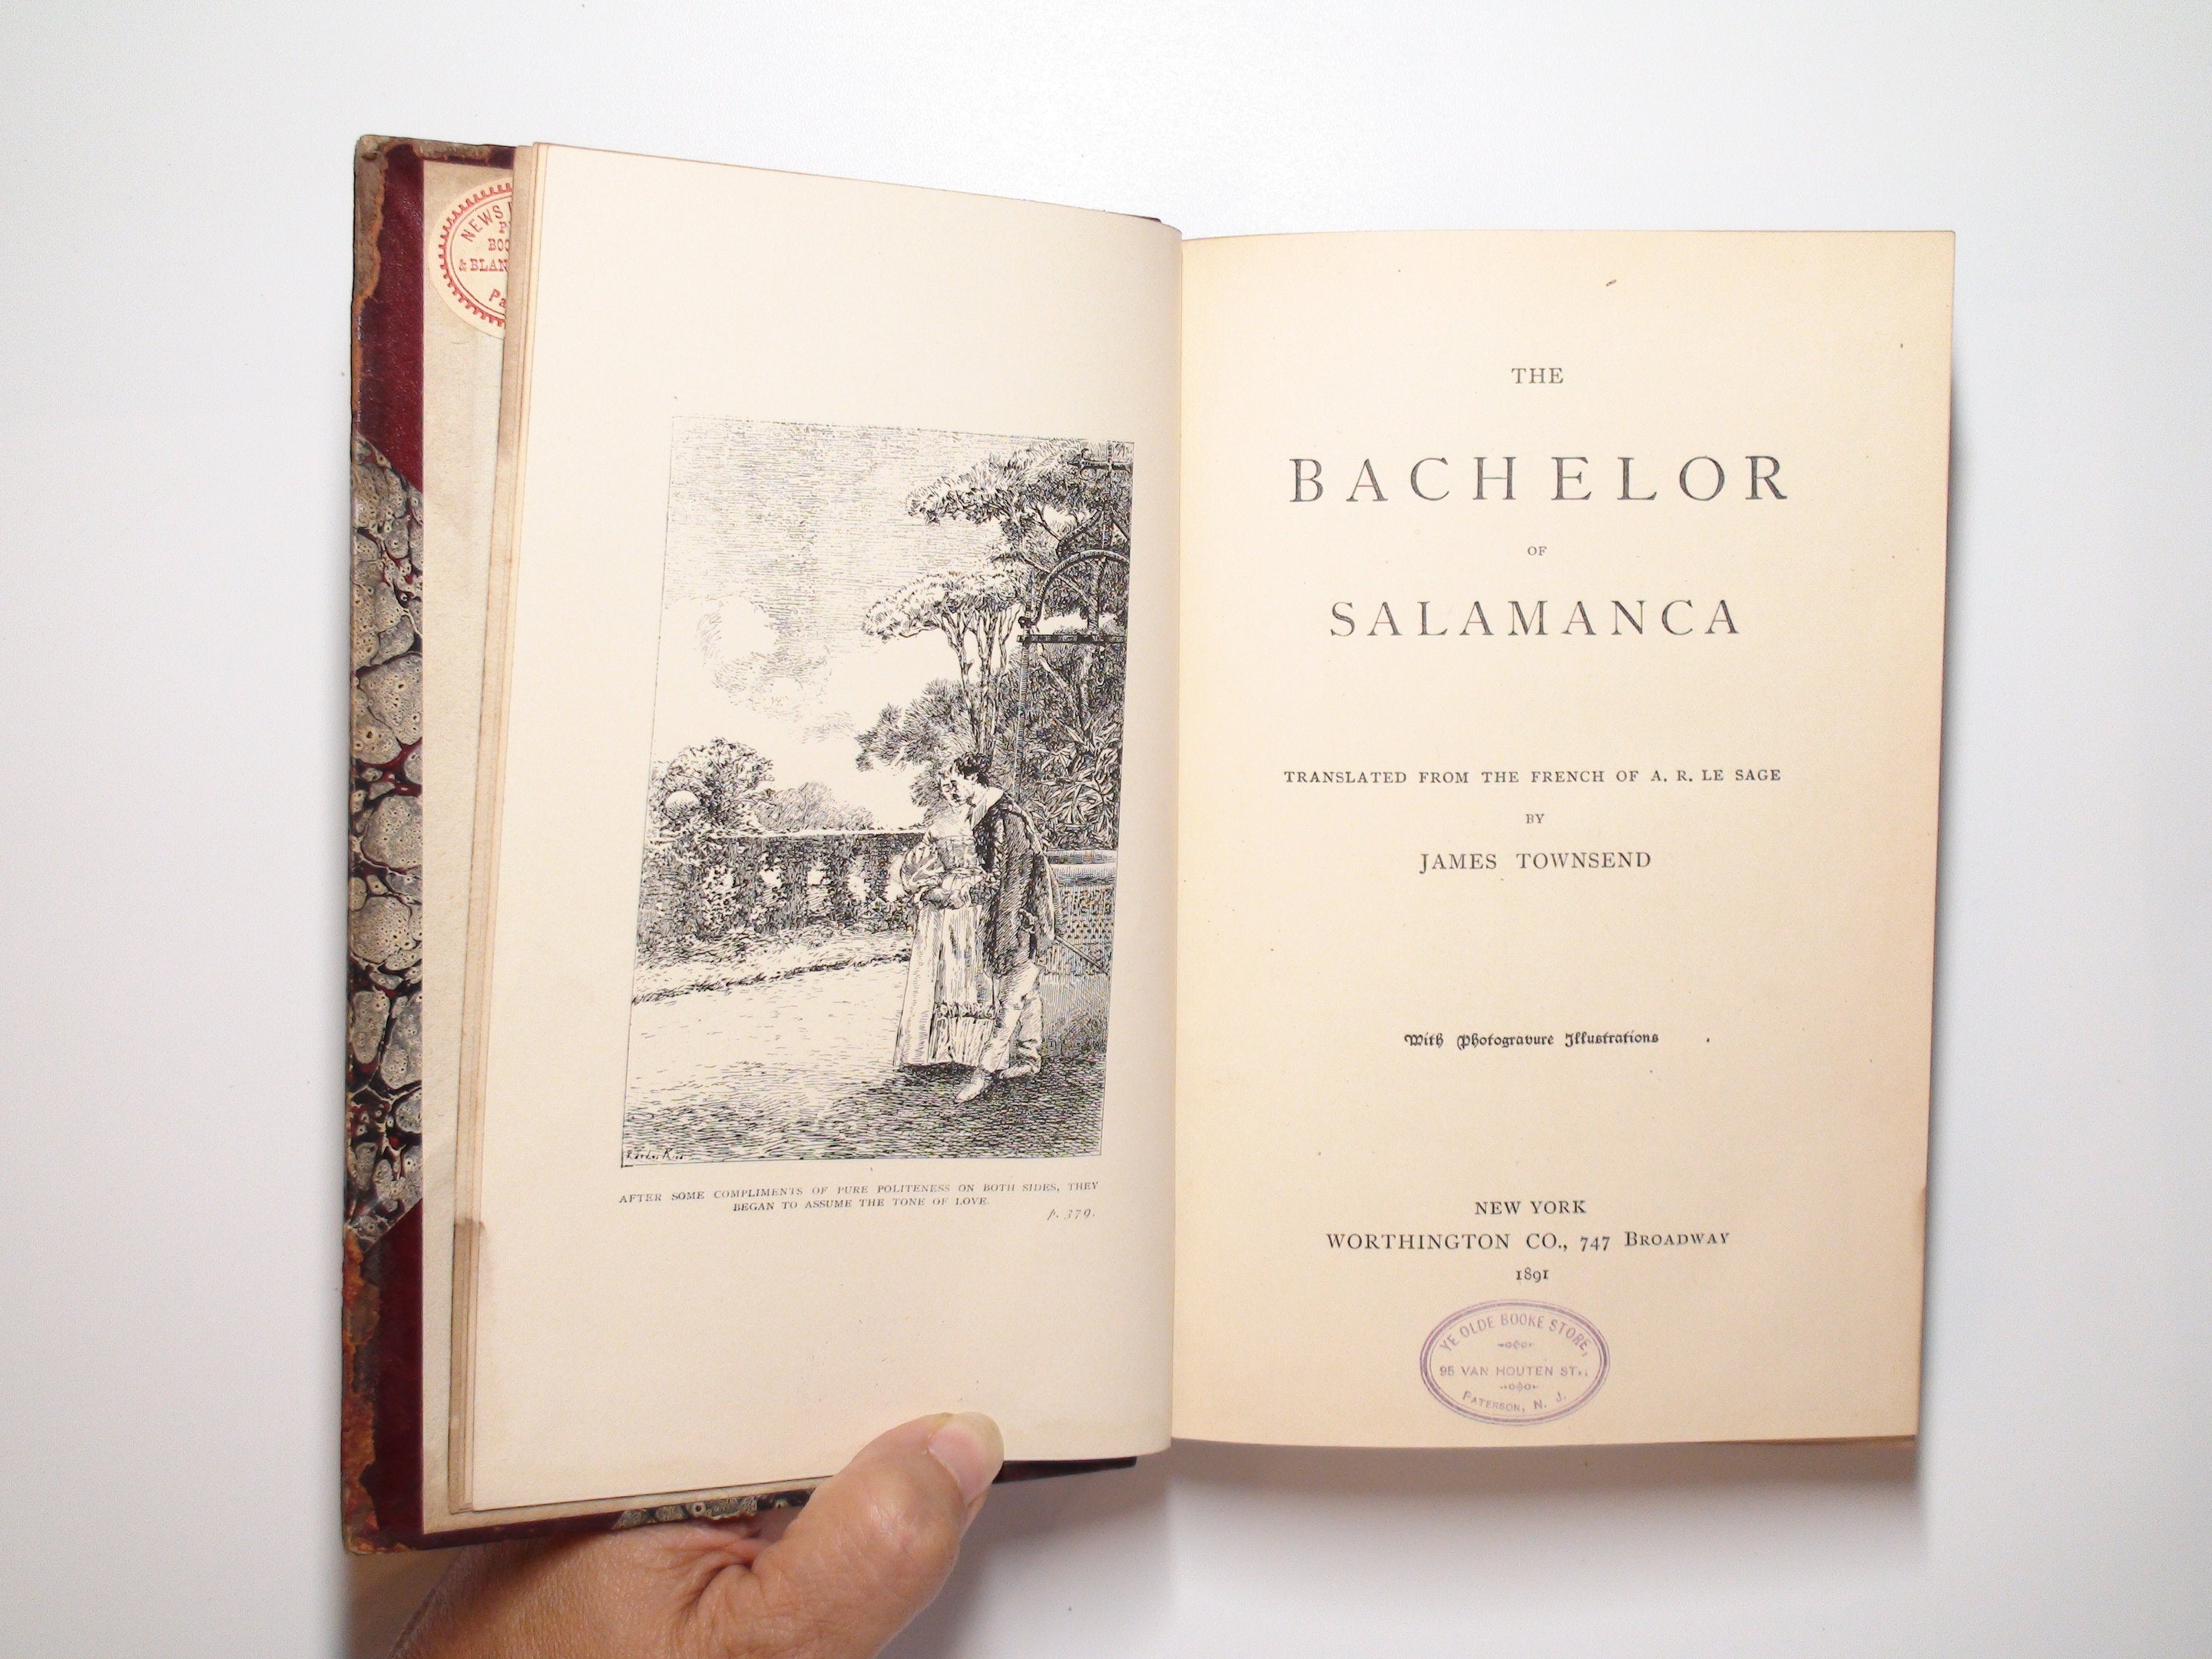 The Bachelor of Salamanca, James Townsend, Illustrated with Photogravures, 1891